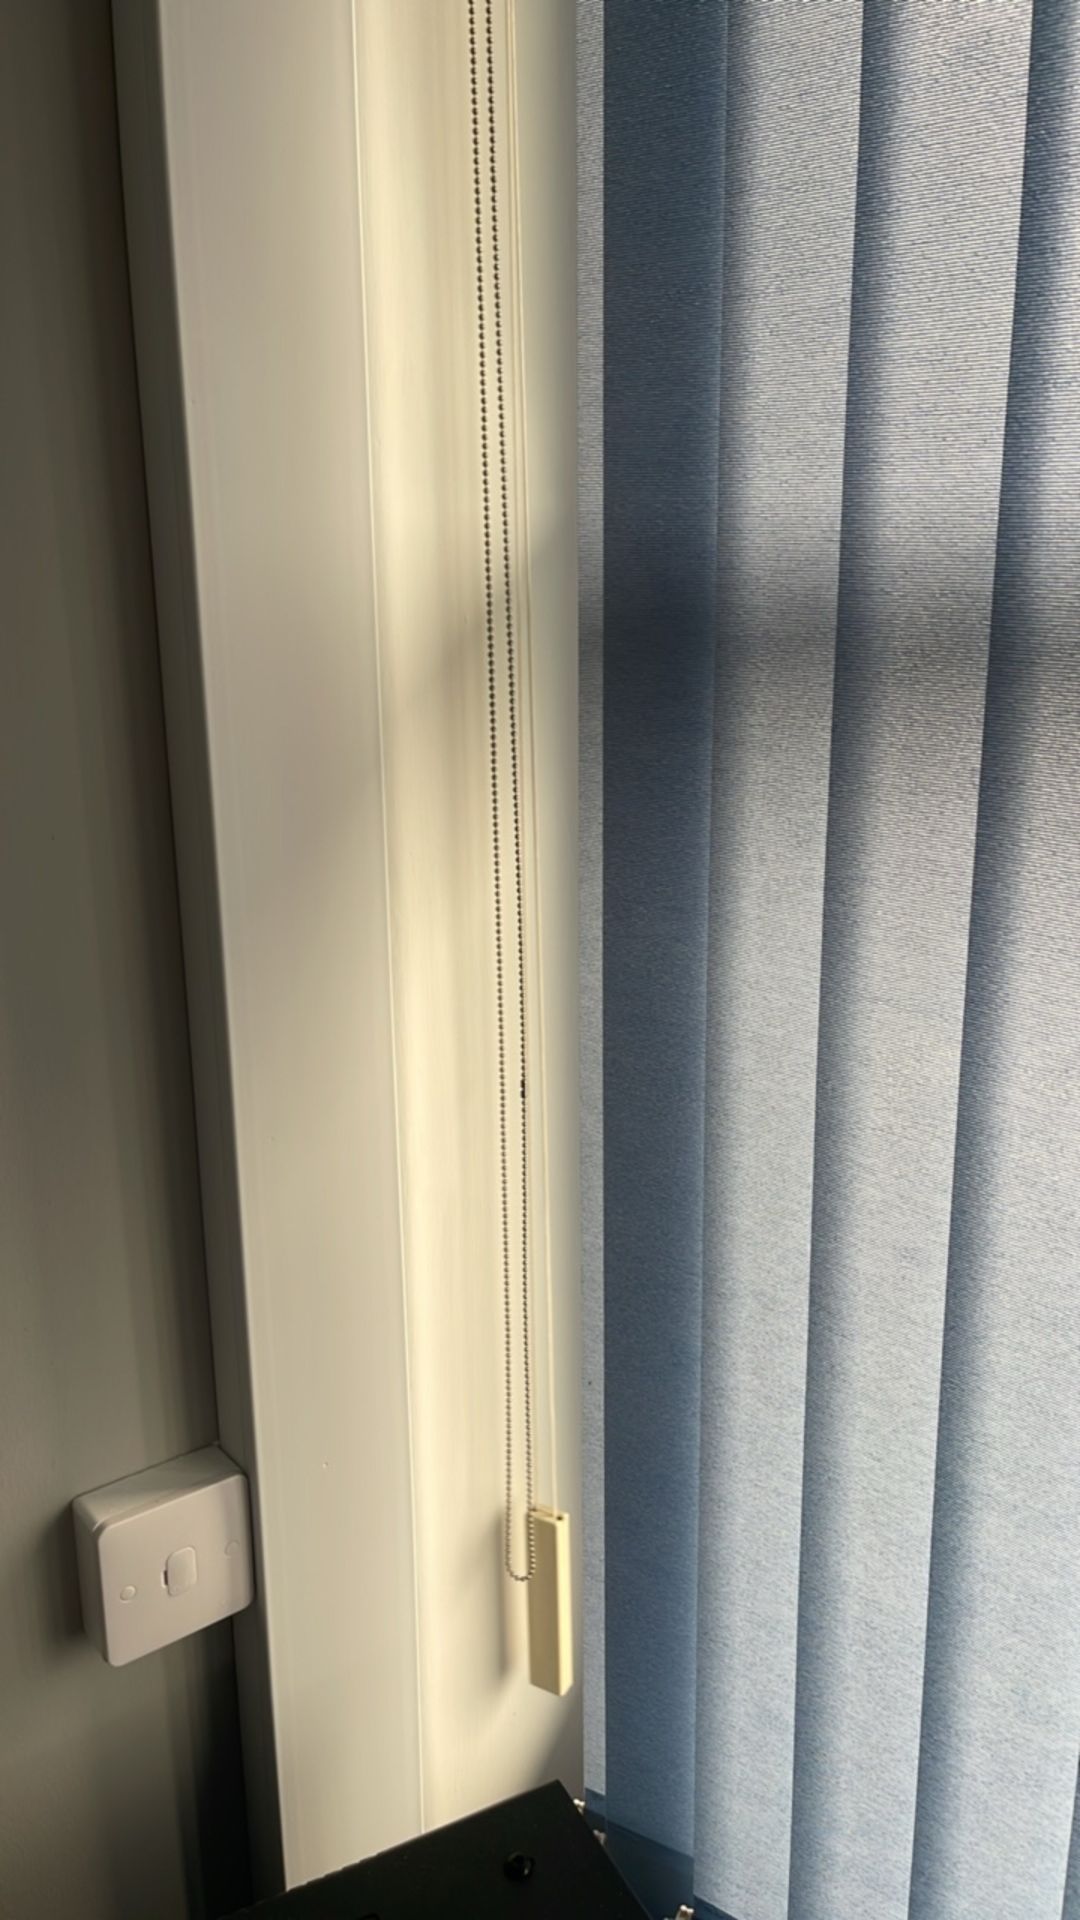 18m Of Blinds - Image 2 of 5